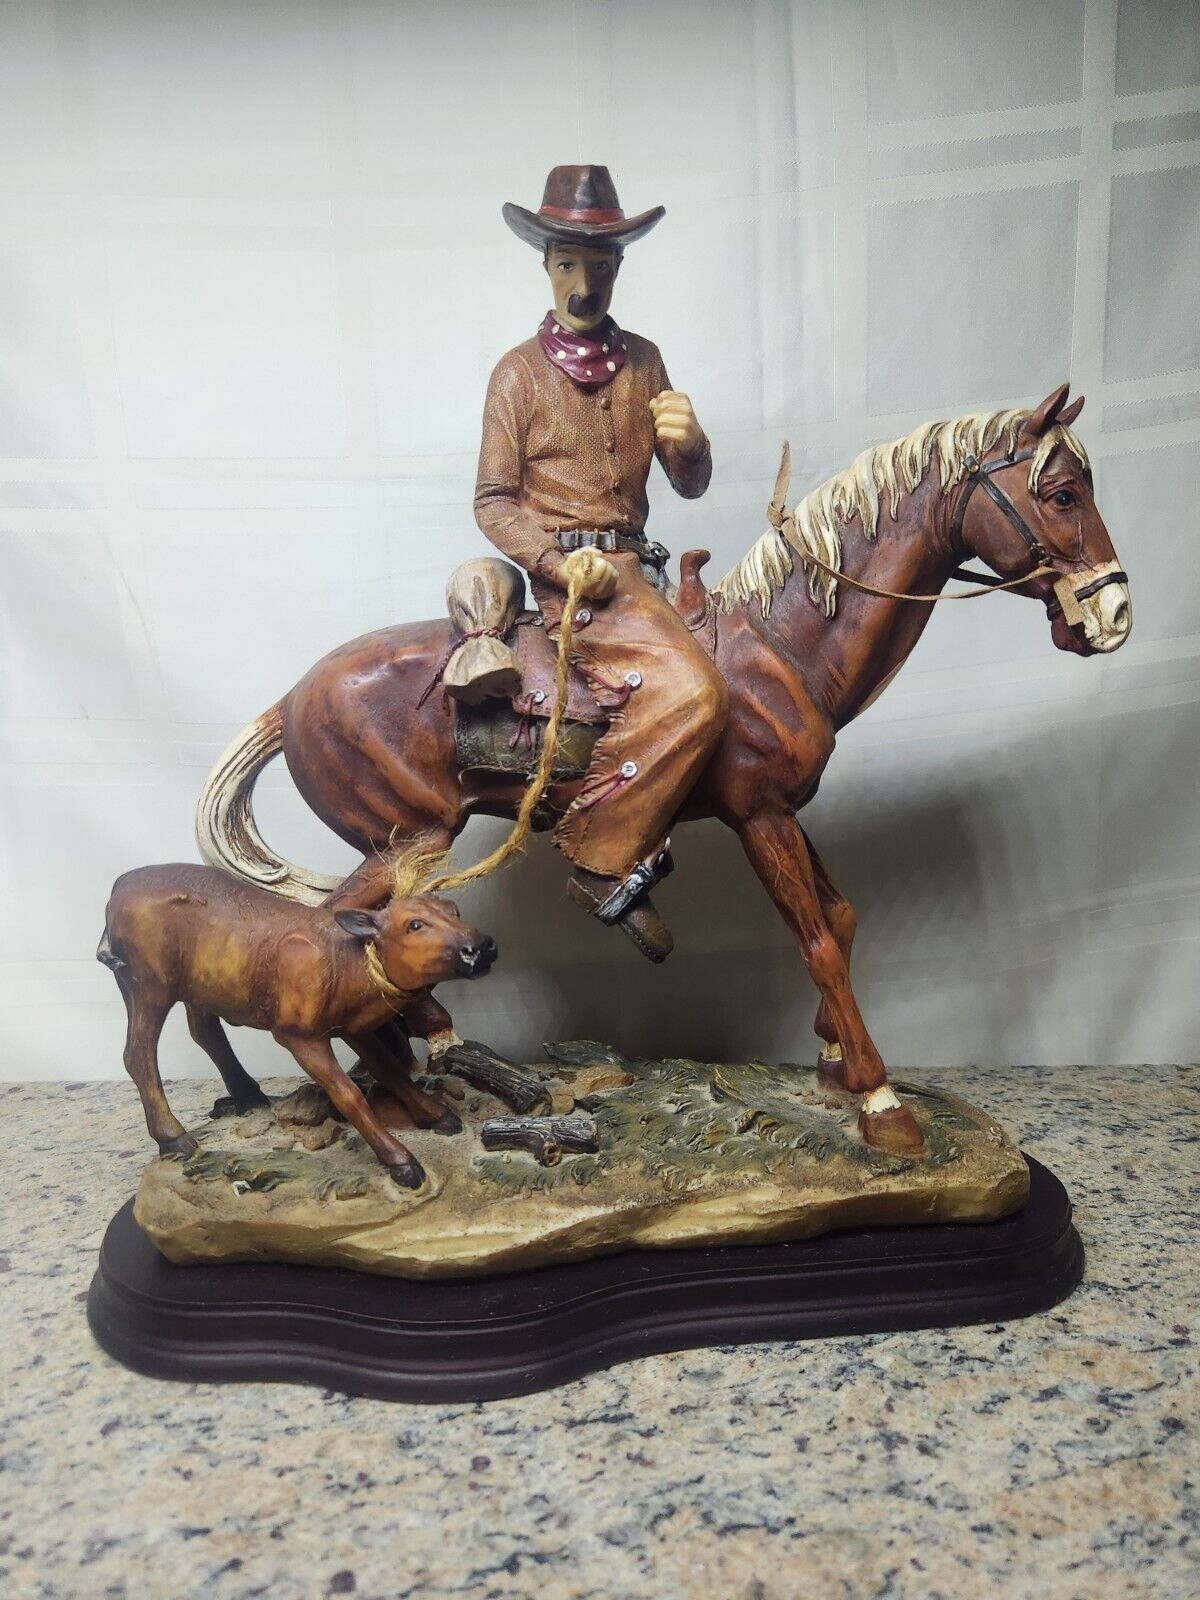 Sculpture Figure Western Cowboy Riding Horse Roping Cow / Bull